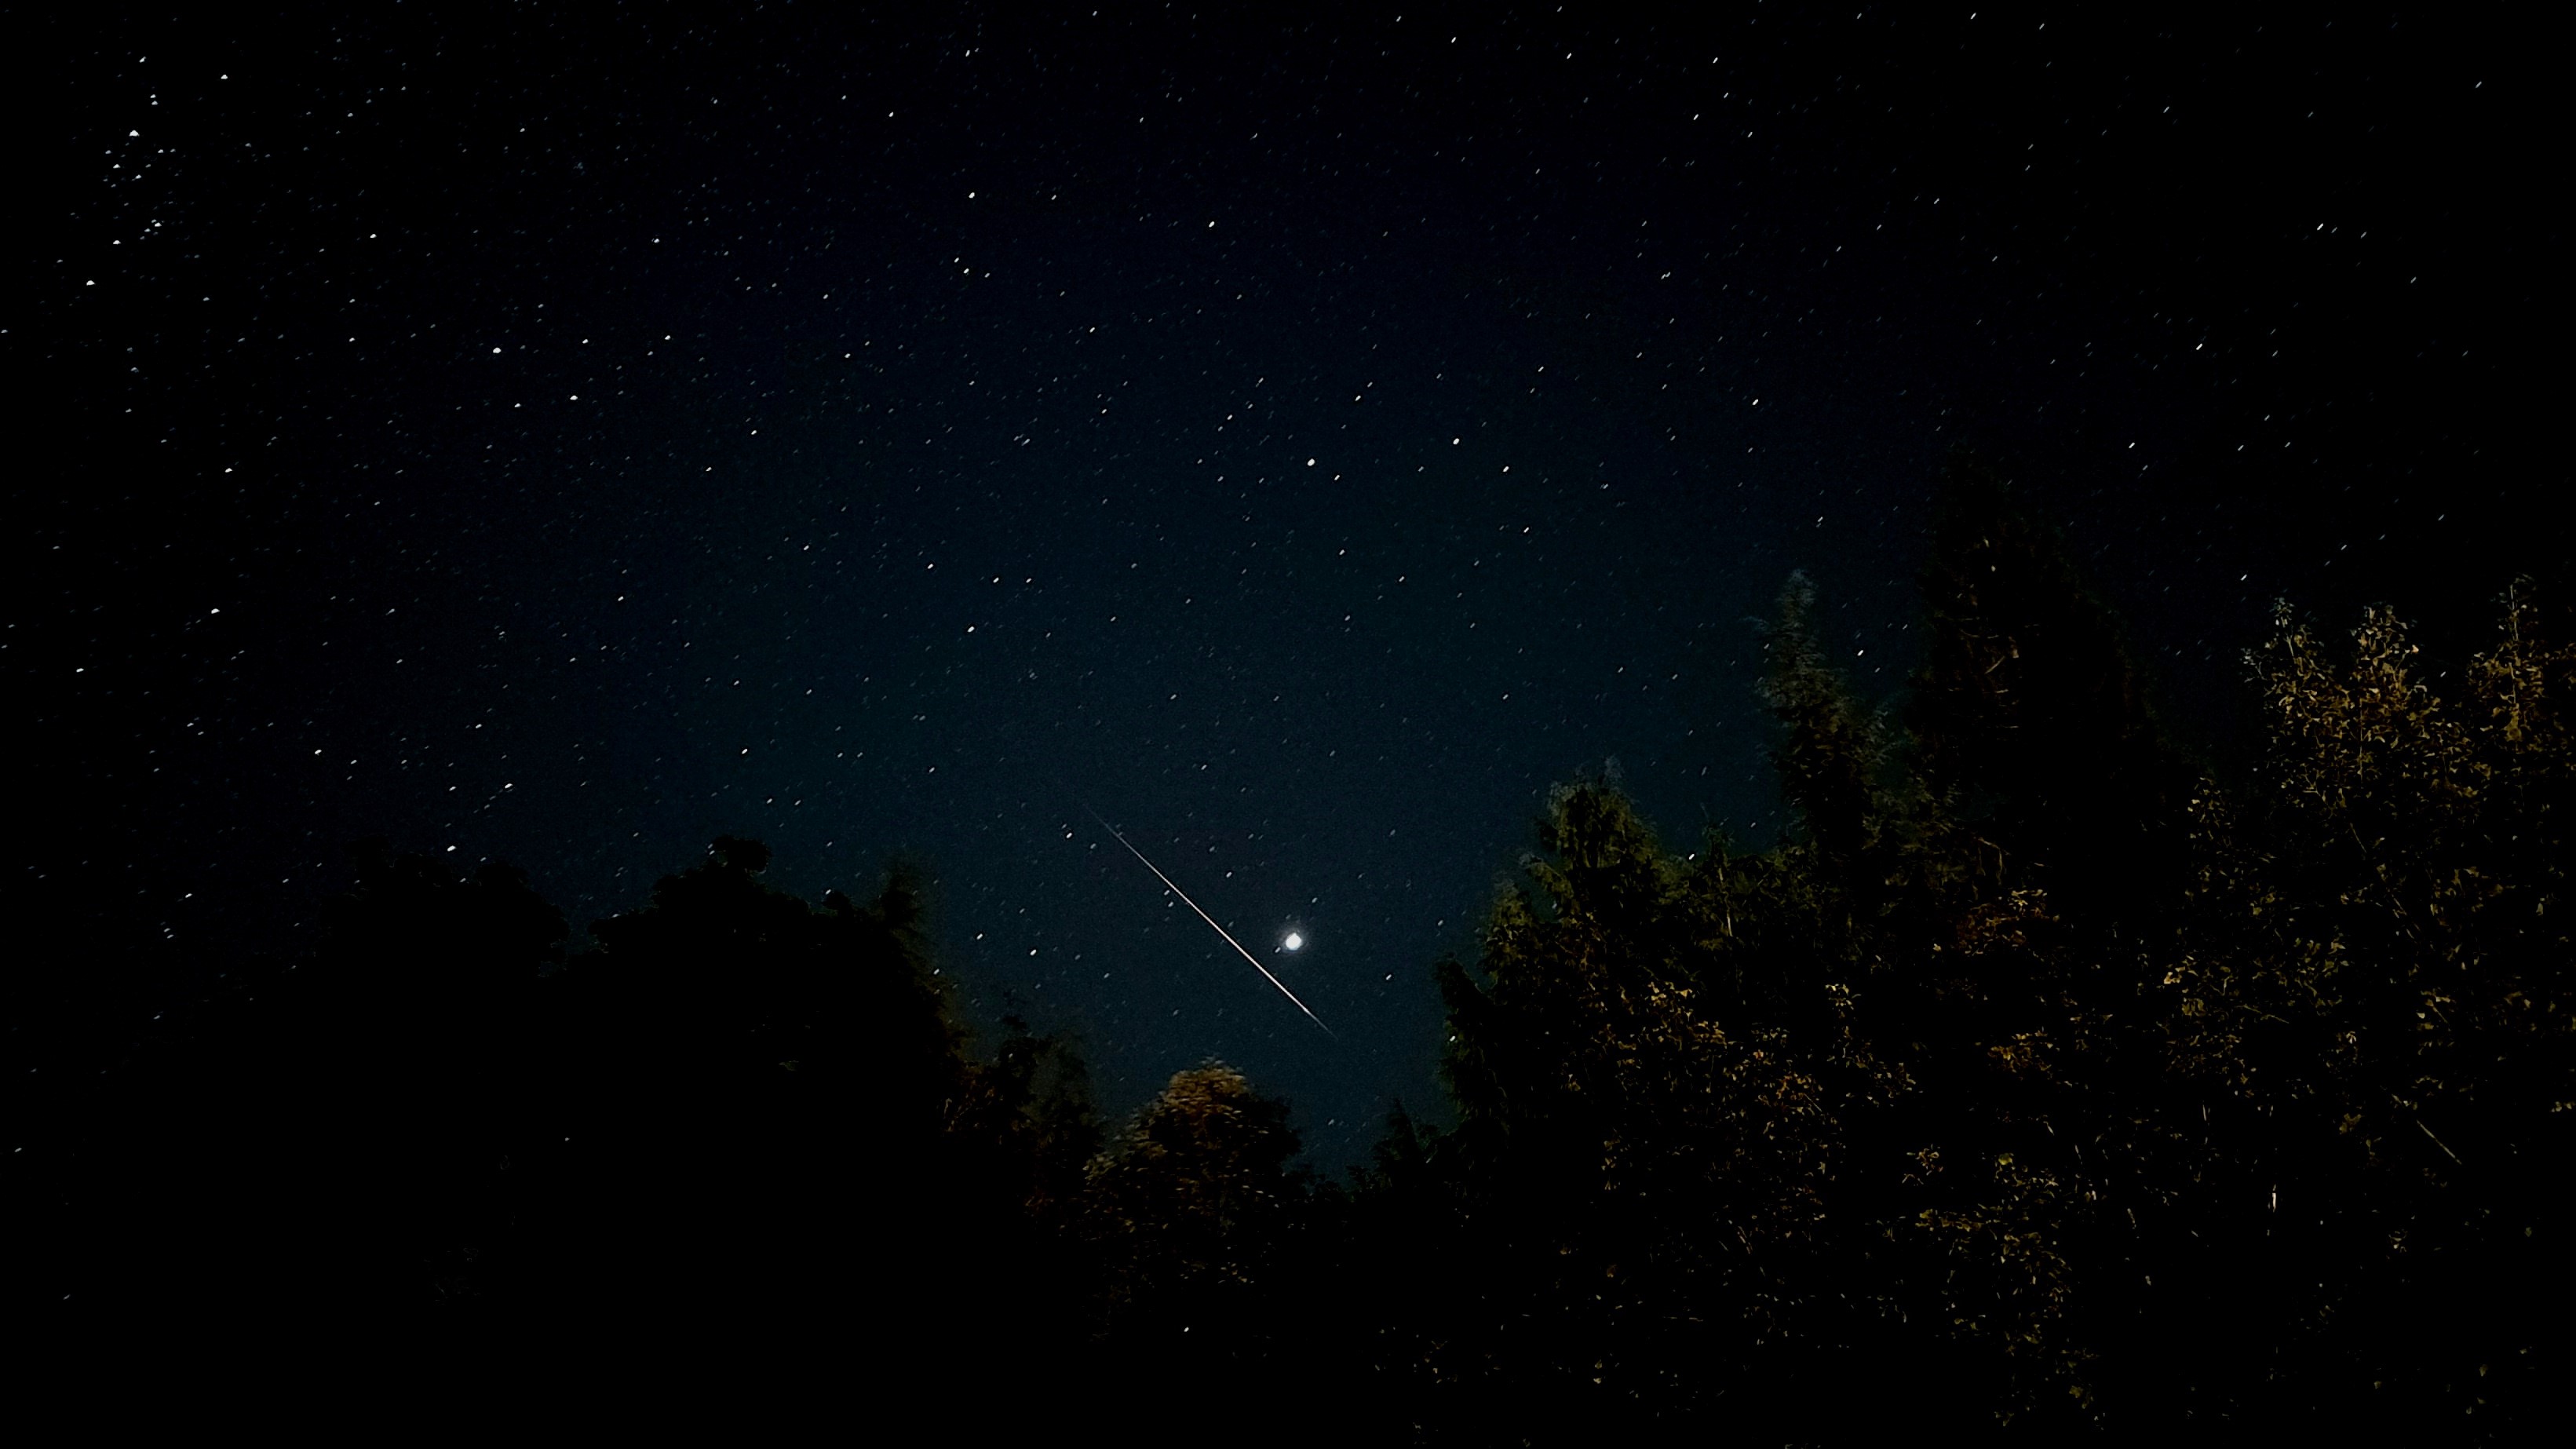 A prominent meteor streaks across the sky beneath the bright planet Jupiter